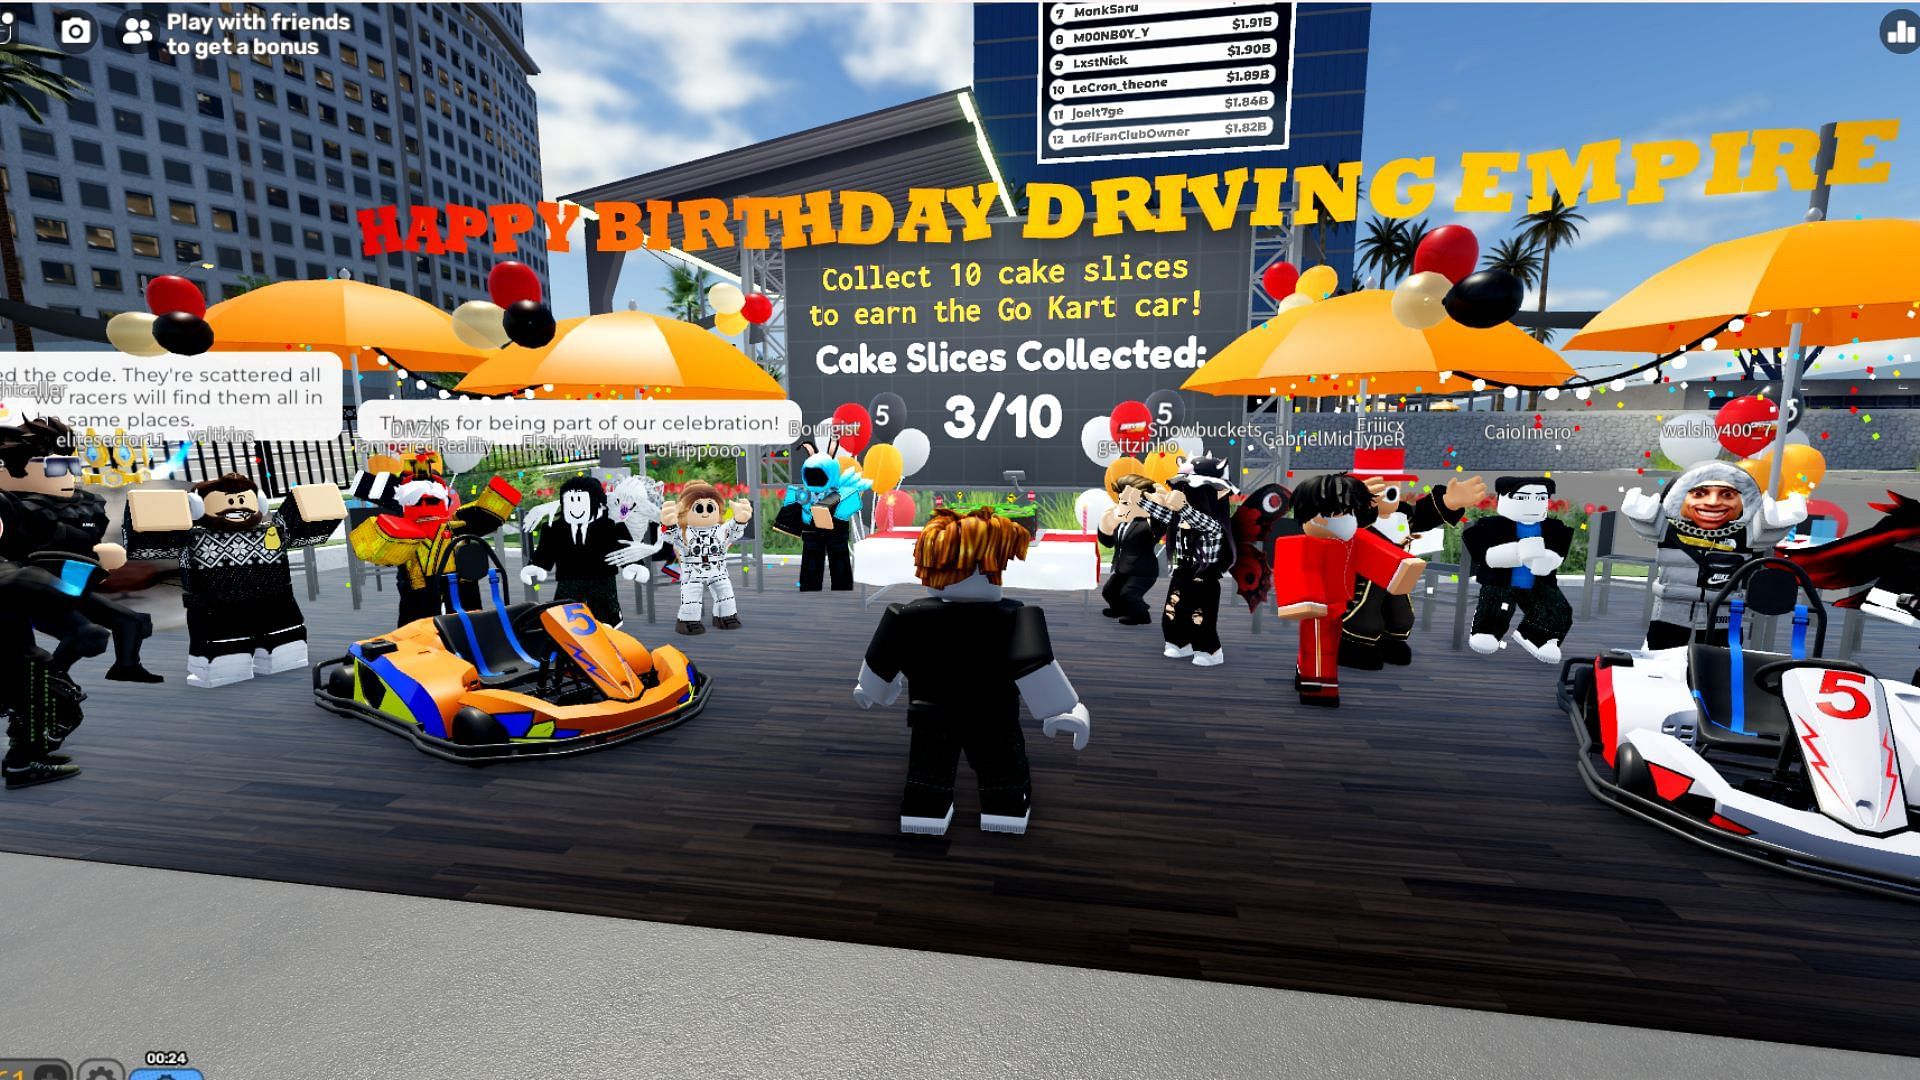 You will obtain a Go Kart car after collecting all the slices (Image via Roblox)